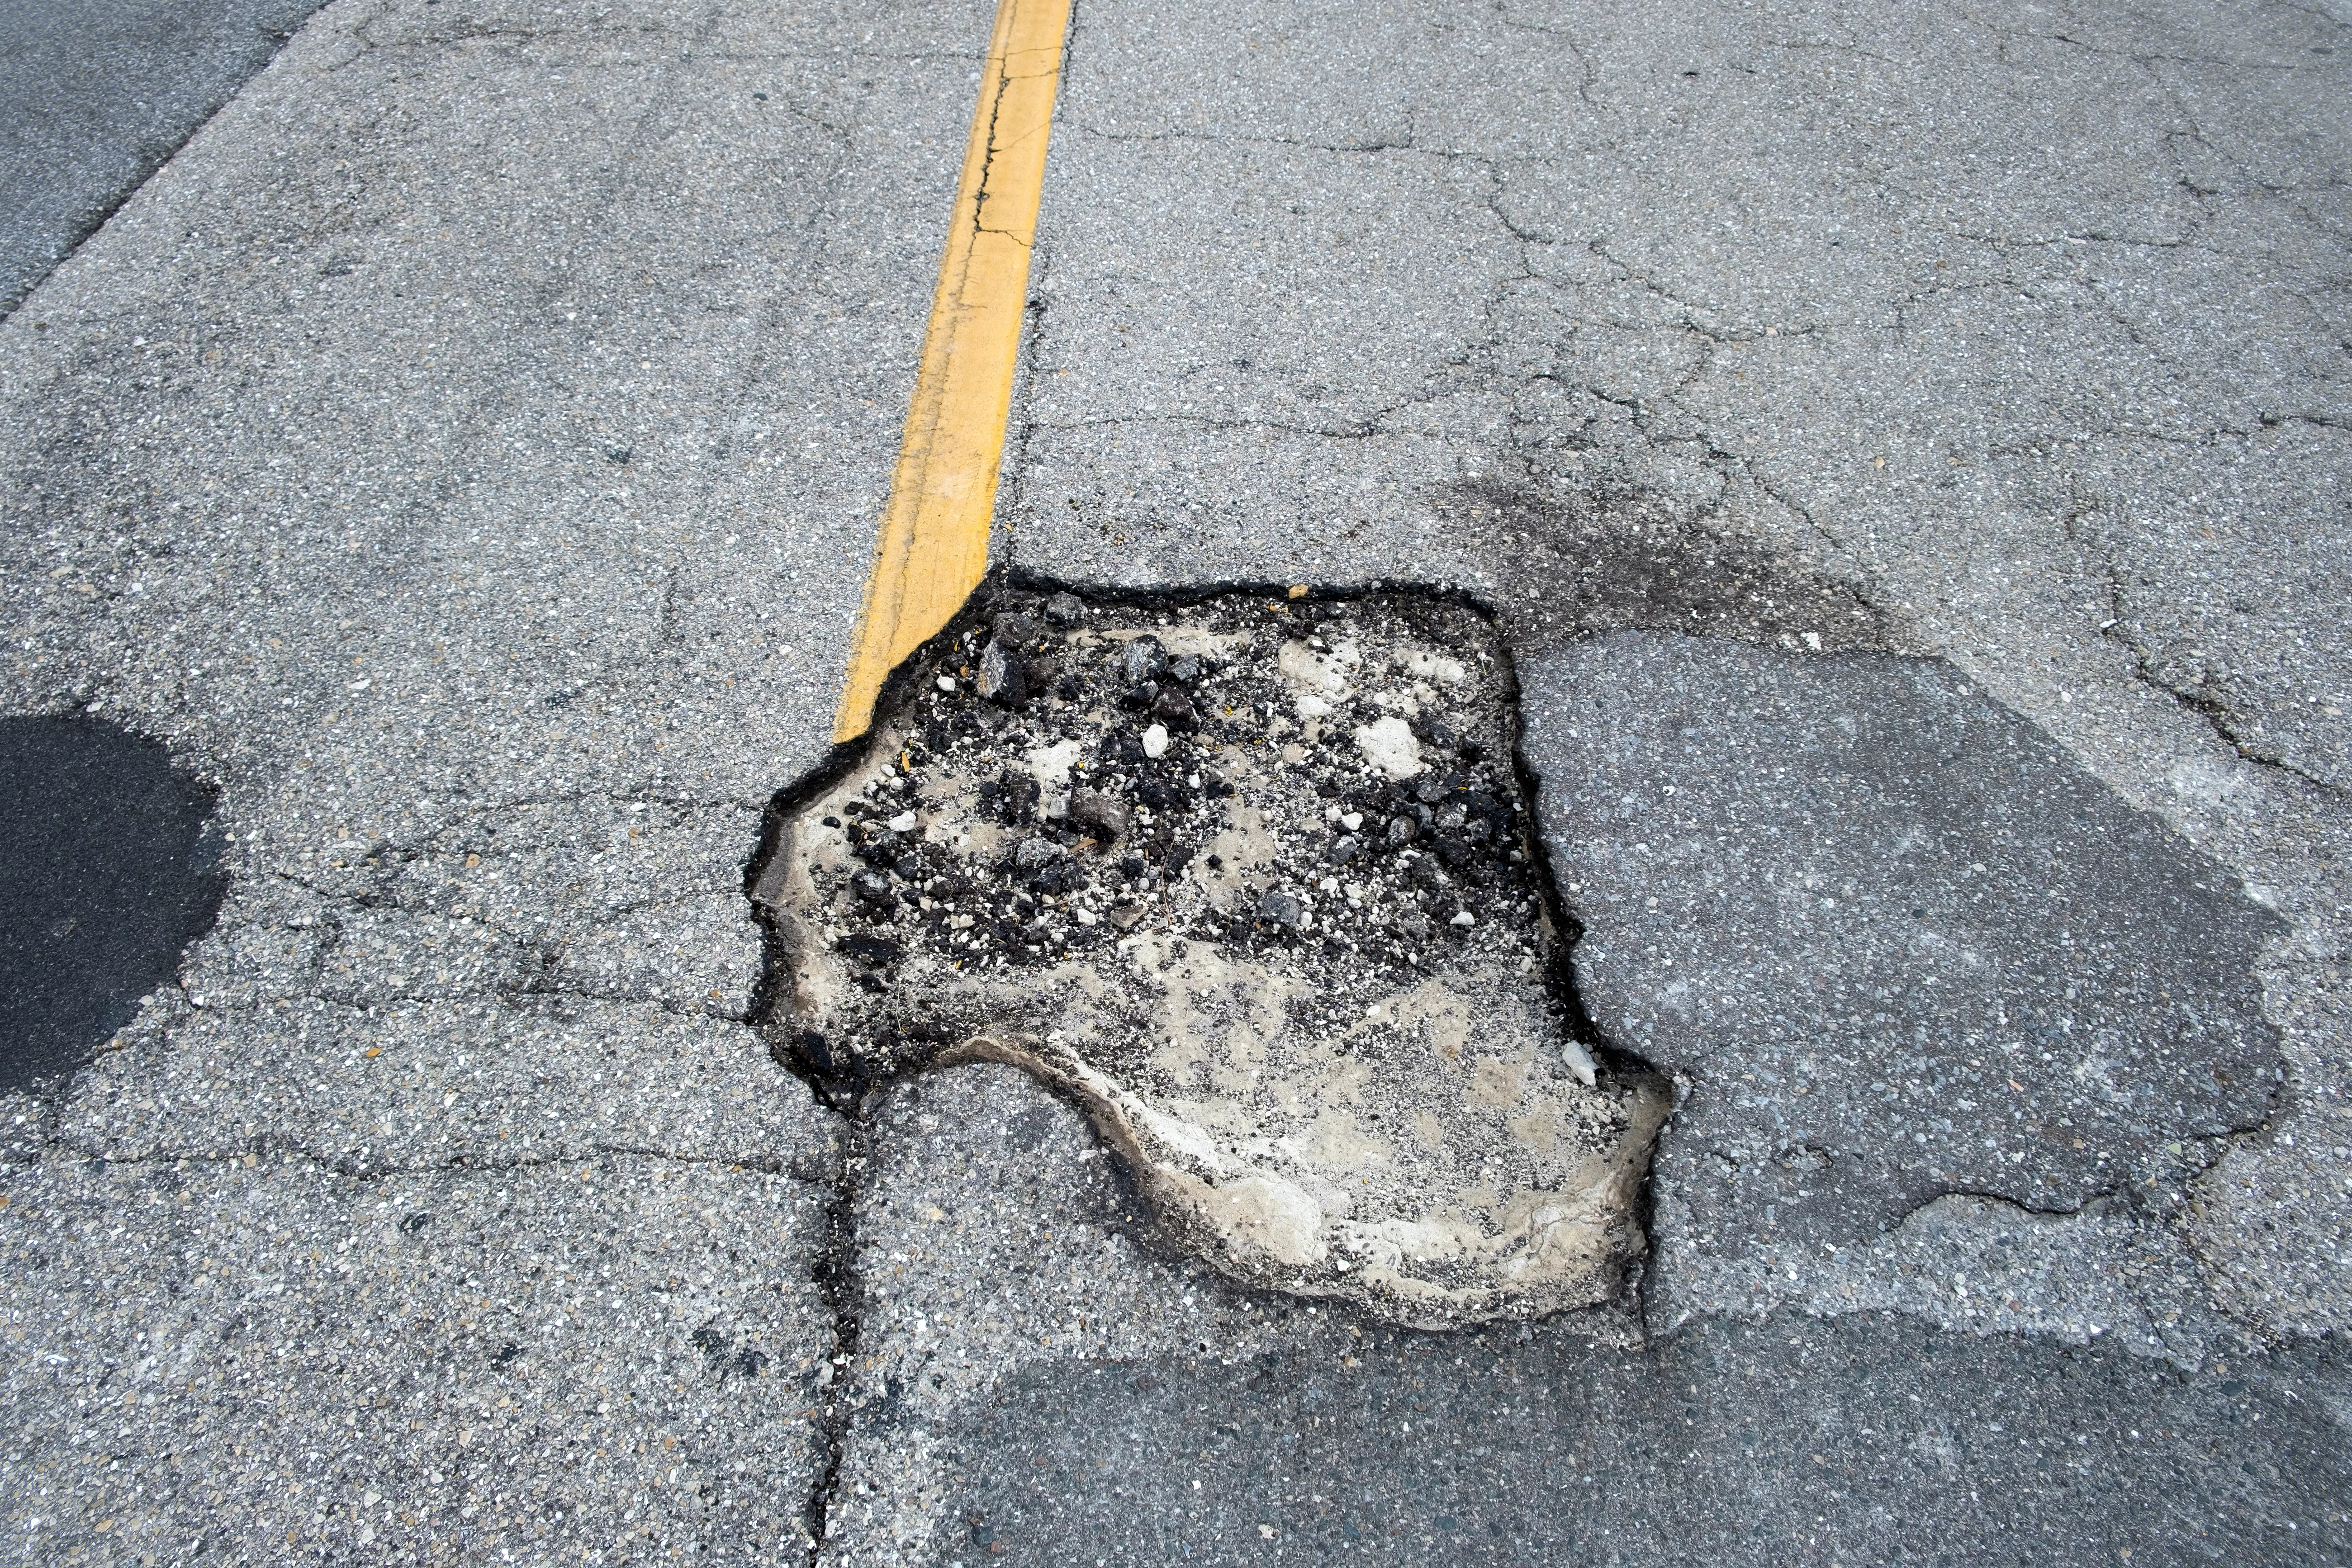 Damaged asphalt road with deep pothole on american highway surface. Ruined roadway in urgent need of repair.